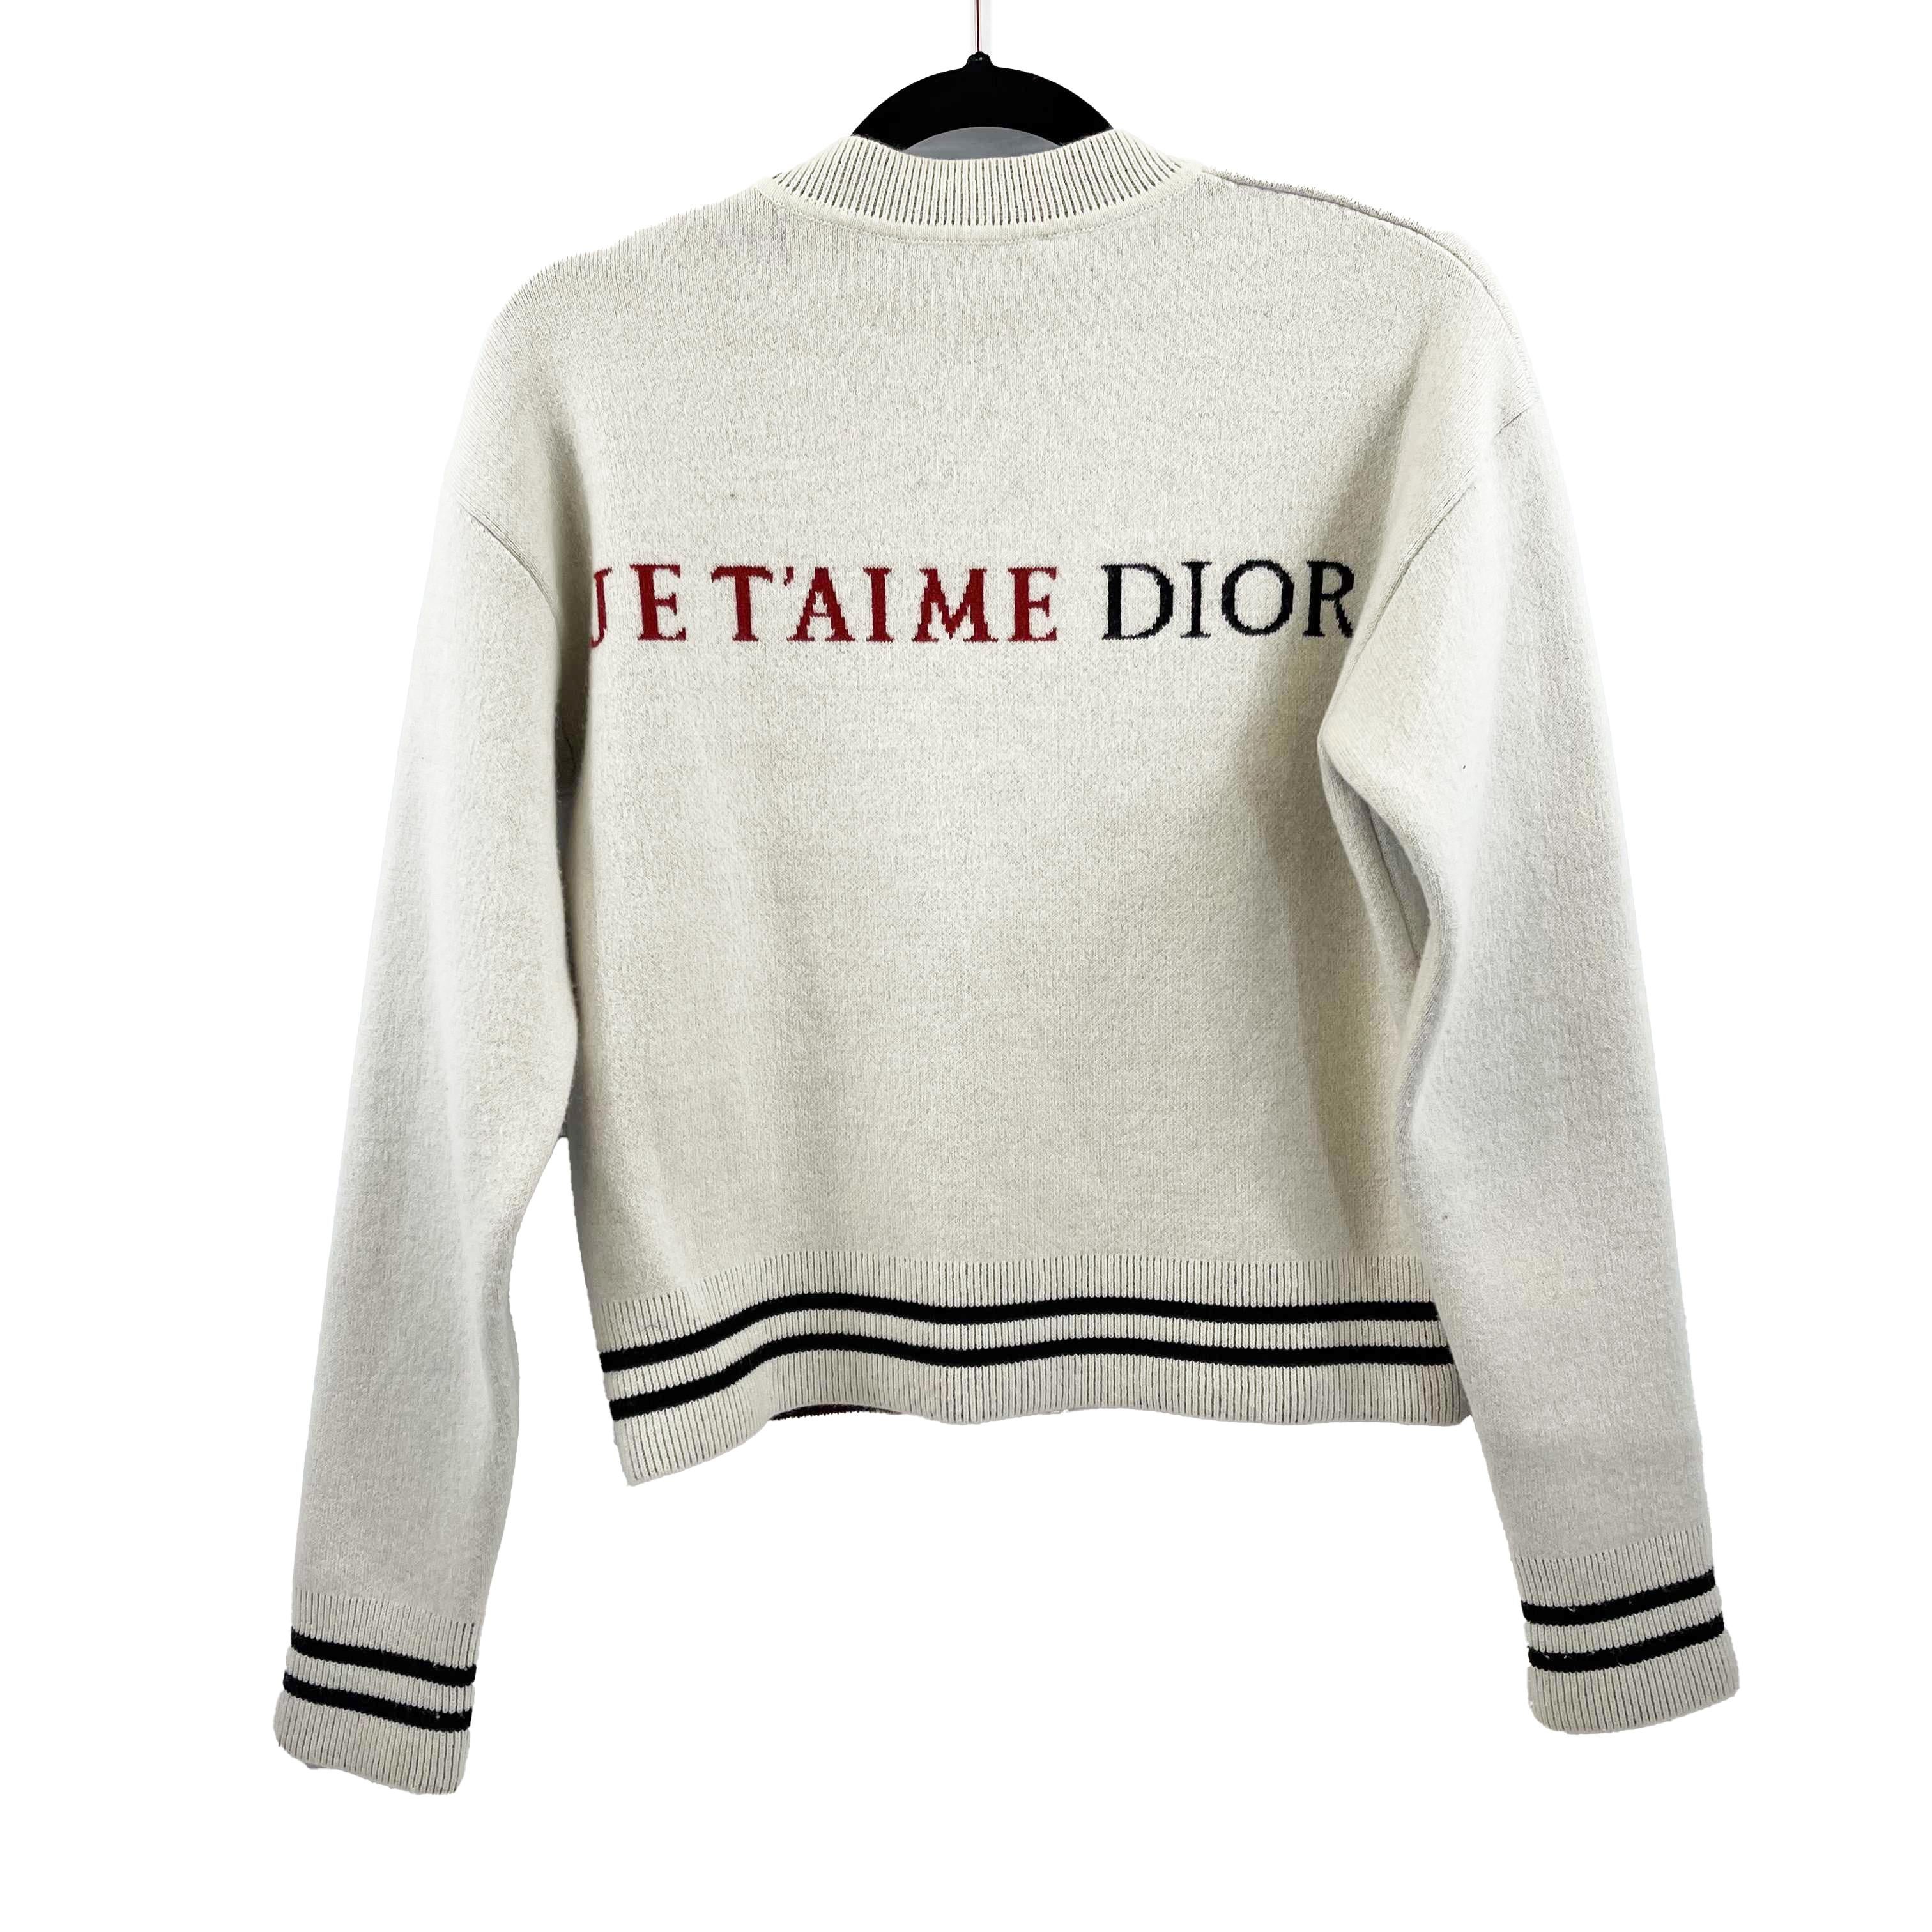 Christian Dior - 2019 Dioramour Capsule Collection Sweater Ivory - 34 US 2 

Description

2019 Collection. 
To celebrate Chinese Valentine’s Day, Dior has released its Dioramour line, a collection of clothing, bags, shoes and accessories.
The range